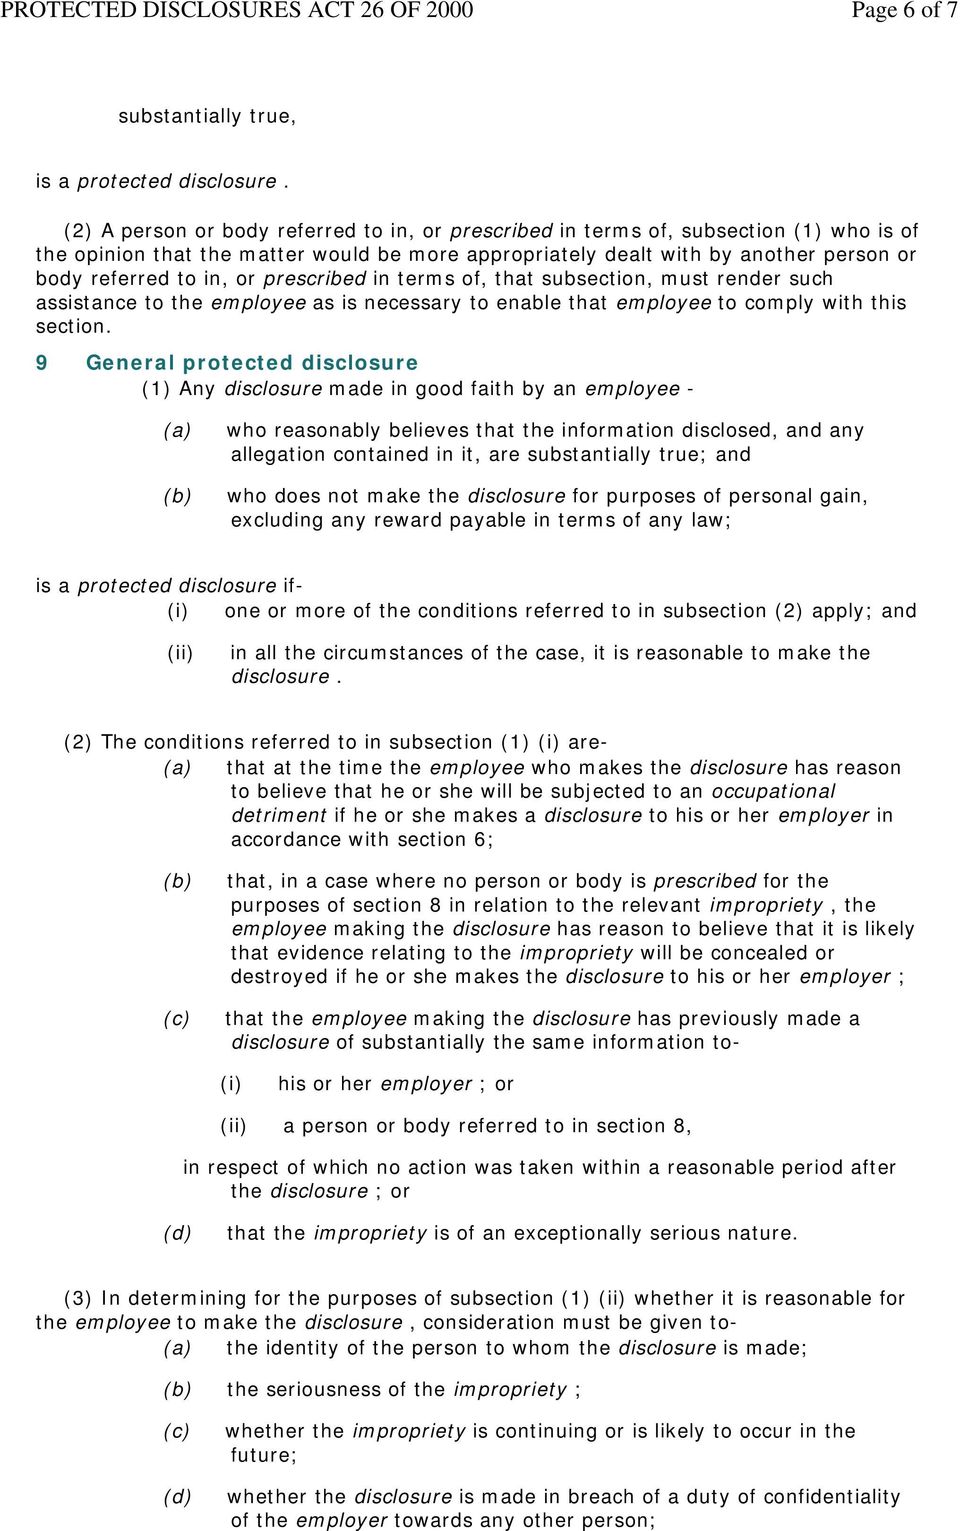 or prescribed in terms of, that subsection, must render such assistance to the employee as is necessary to enable that employee to comply with this section.